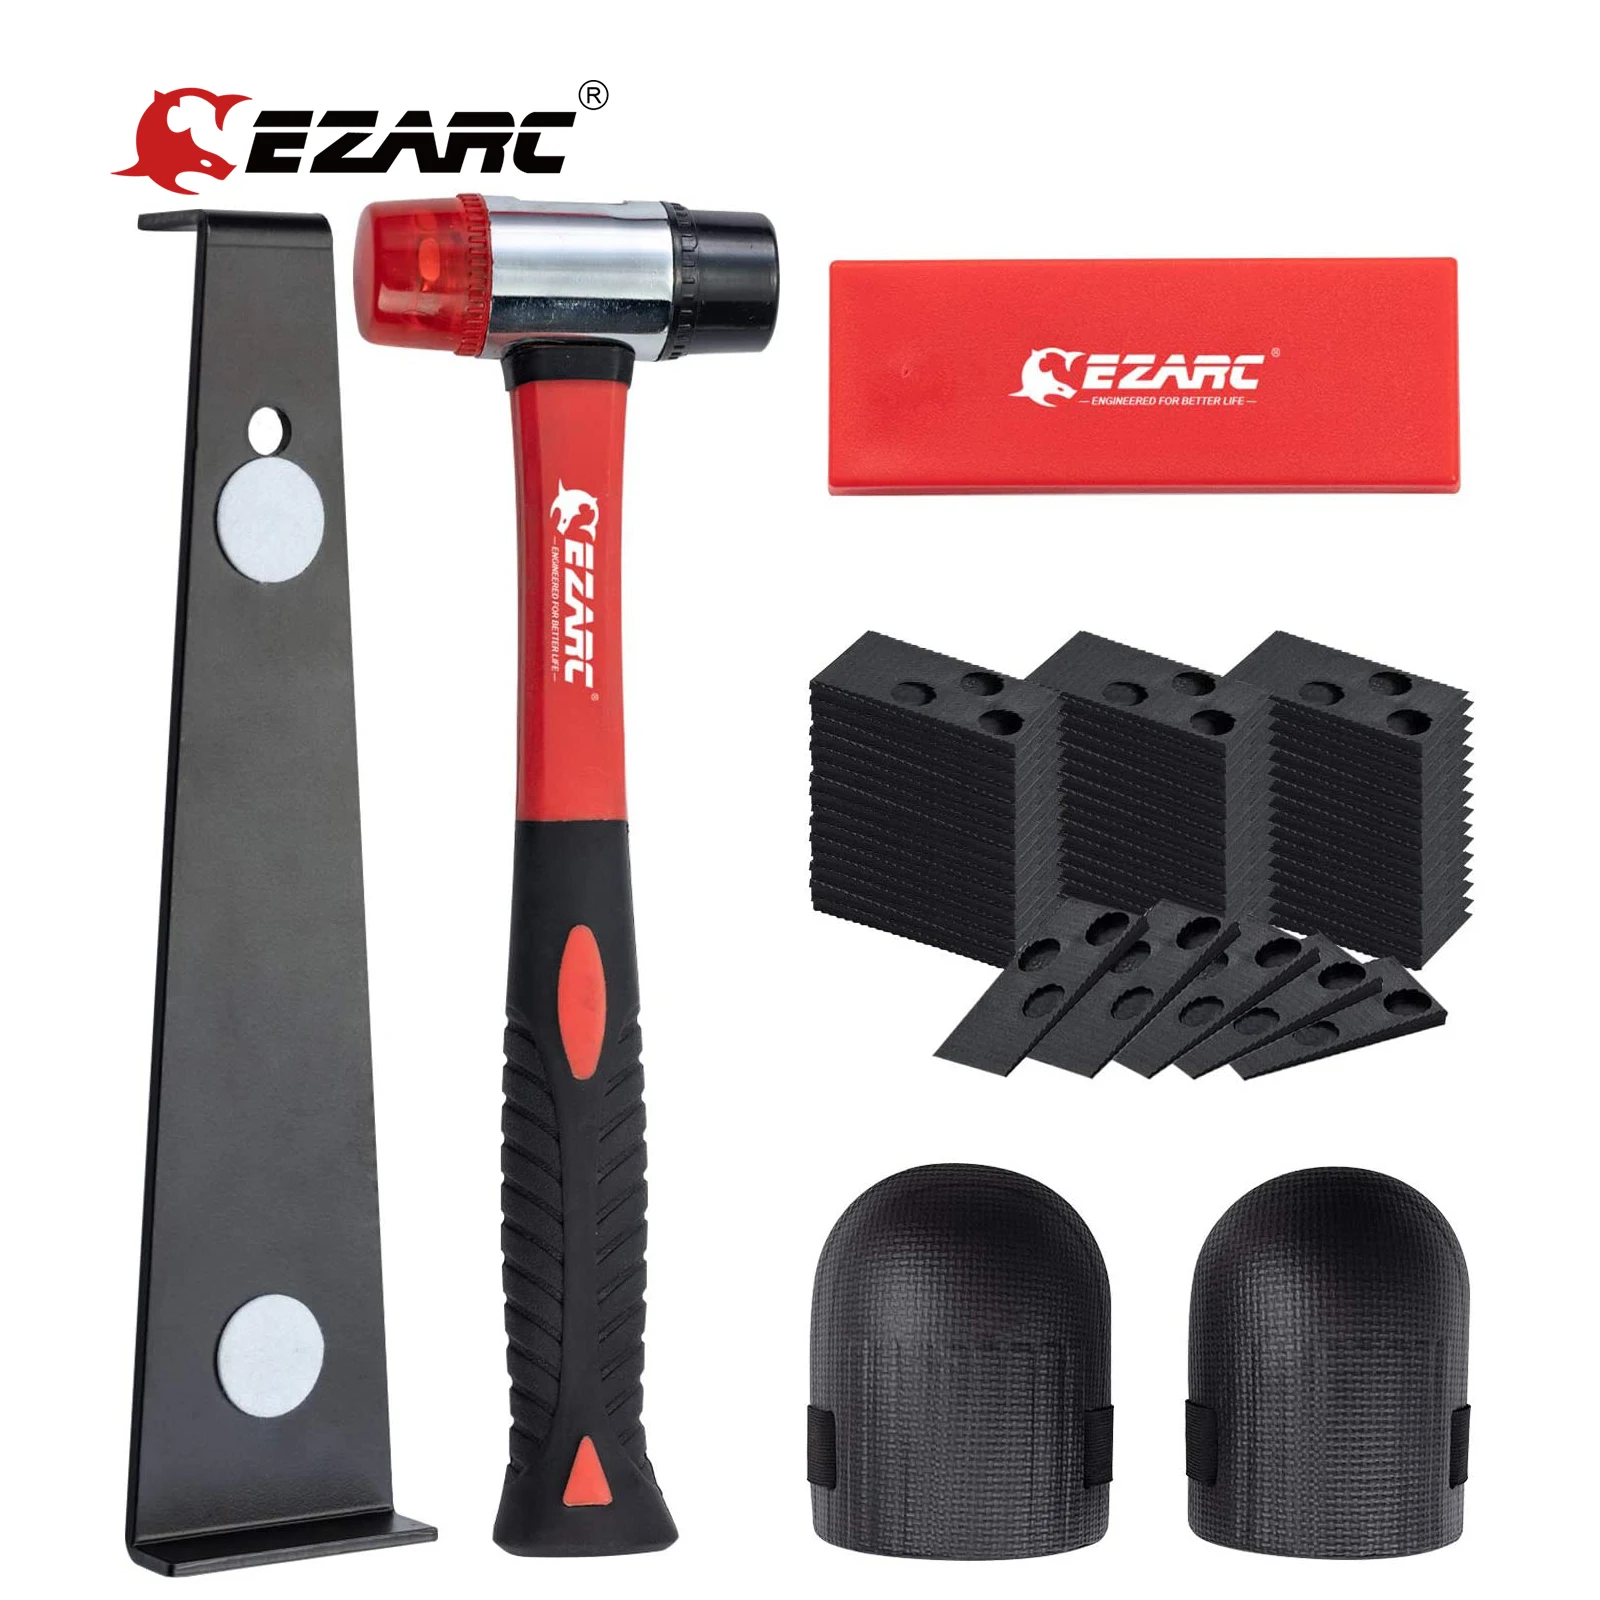 EZARC Laminate Wood Flooring Installation Kit with 60 Spacers,Pull Bar, Rubber Tapping Block, Double-Faced Mallet, Foam Kneepads ezarc laminate wood flooring installation kit with 60 spacers pull bar rubber tapping block double faced mallet foam kneepads